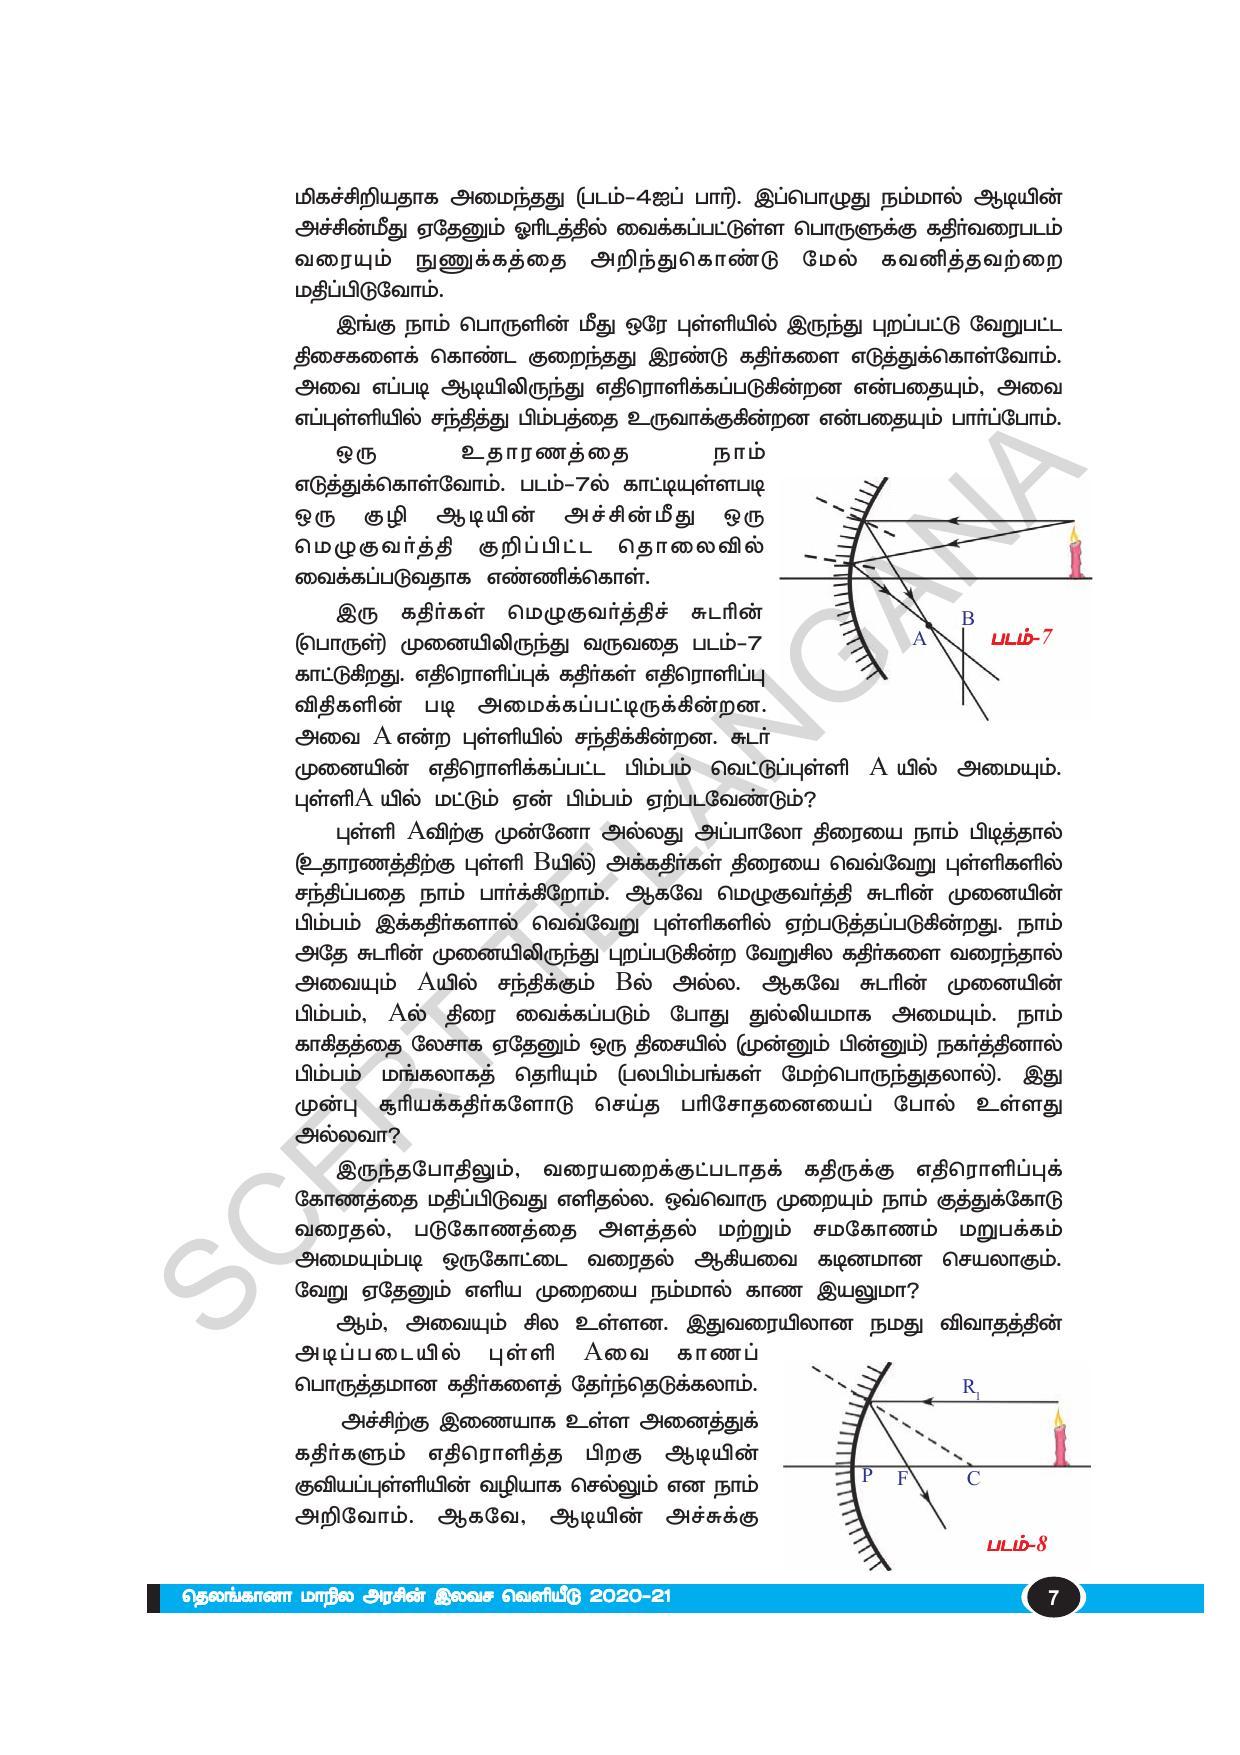 TS SCERT Class 10 Physical Science(Tamil Medium) Text Book - Page 19